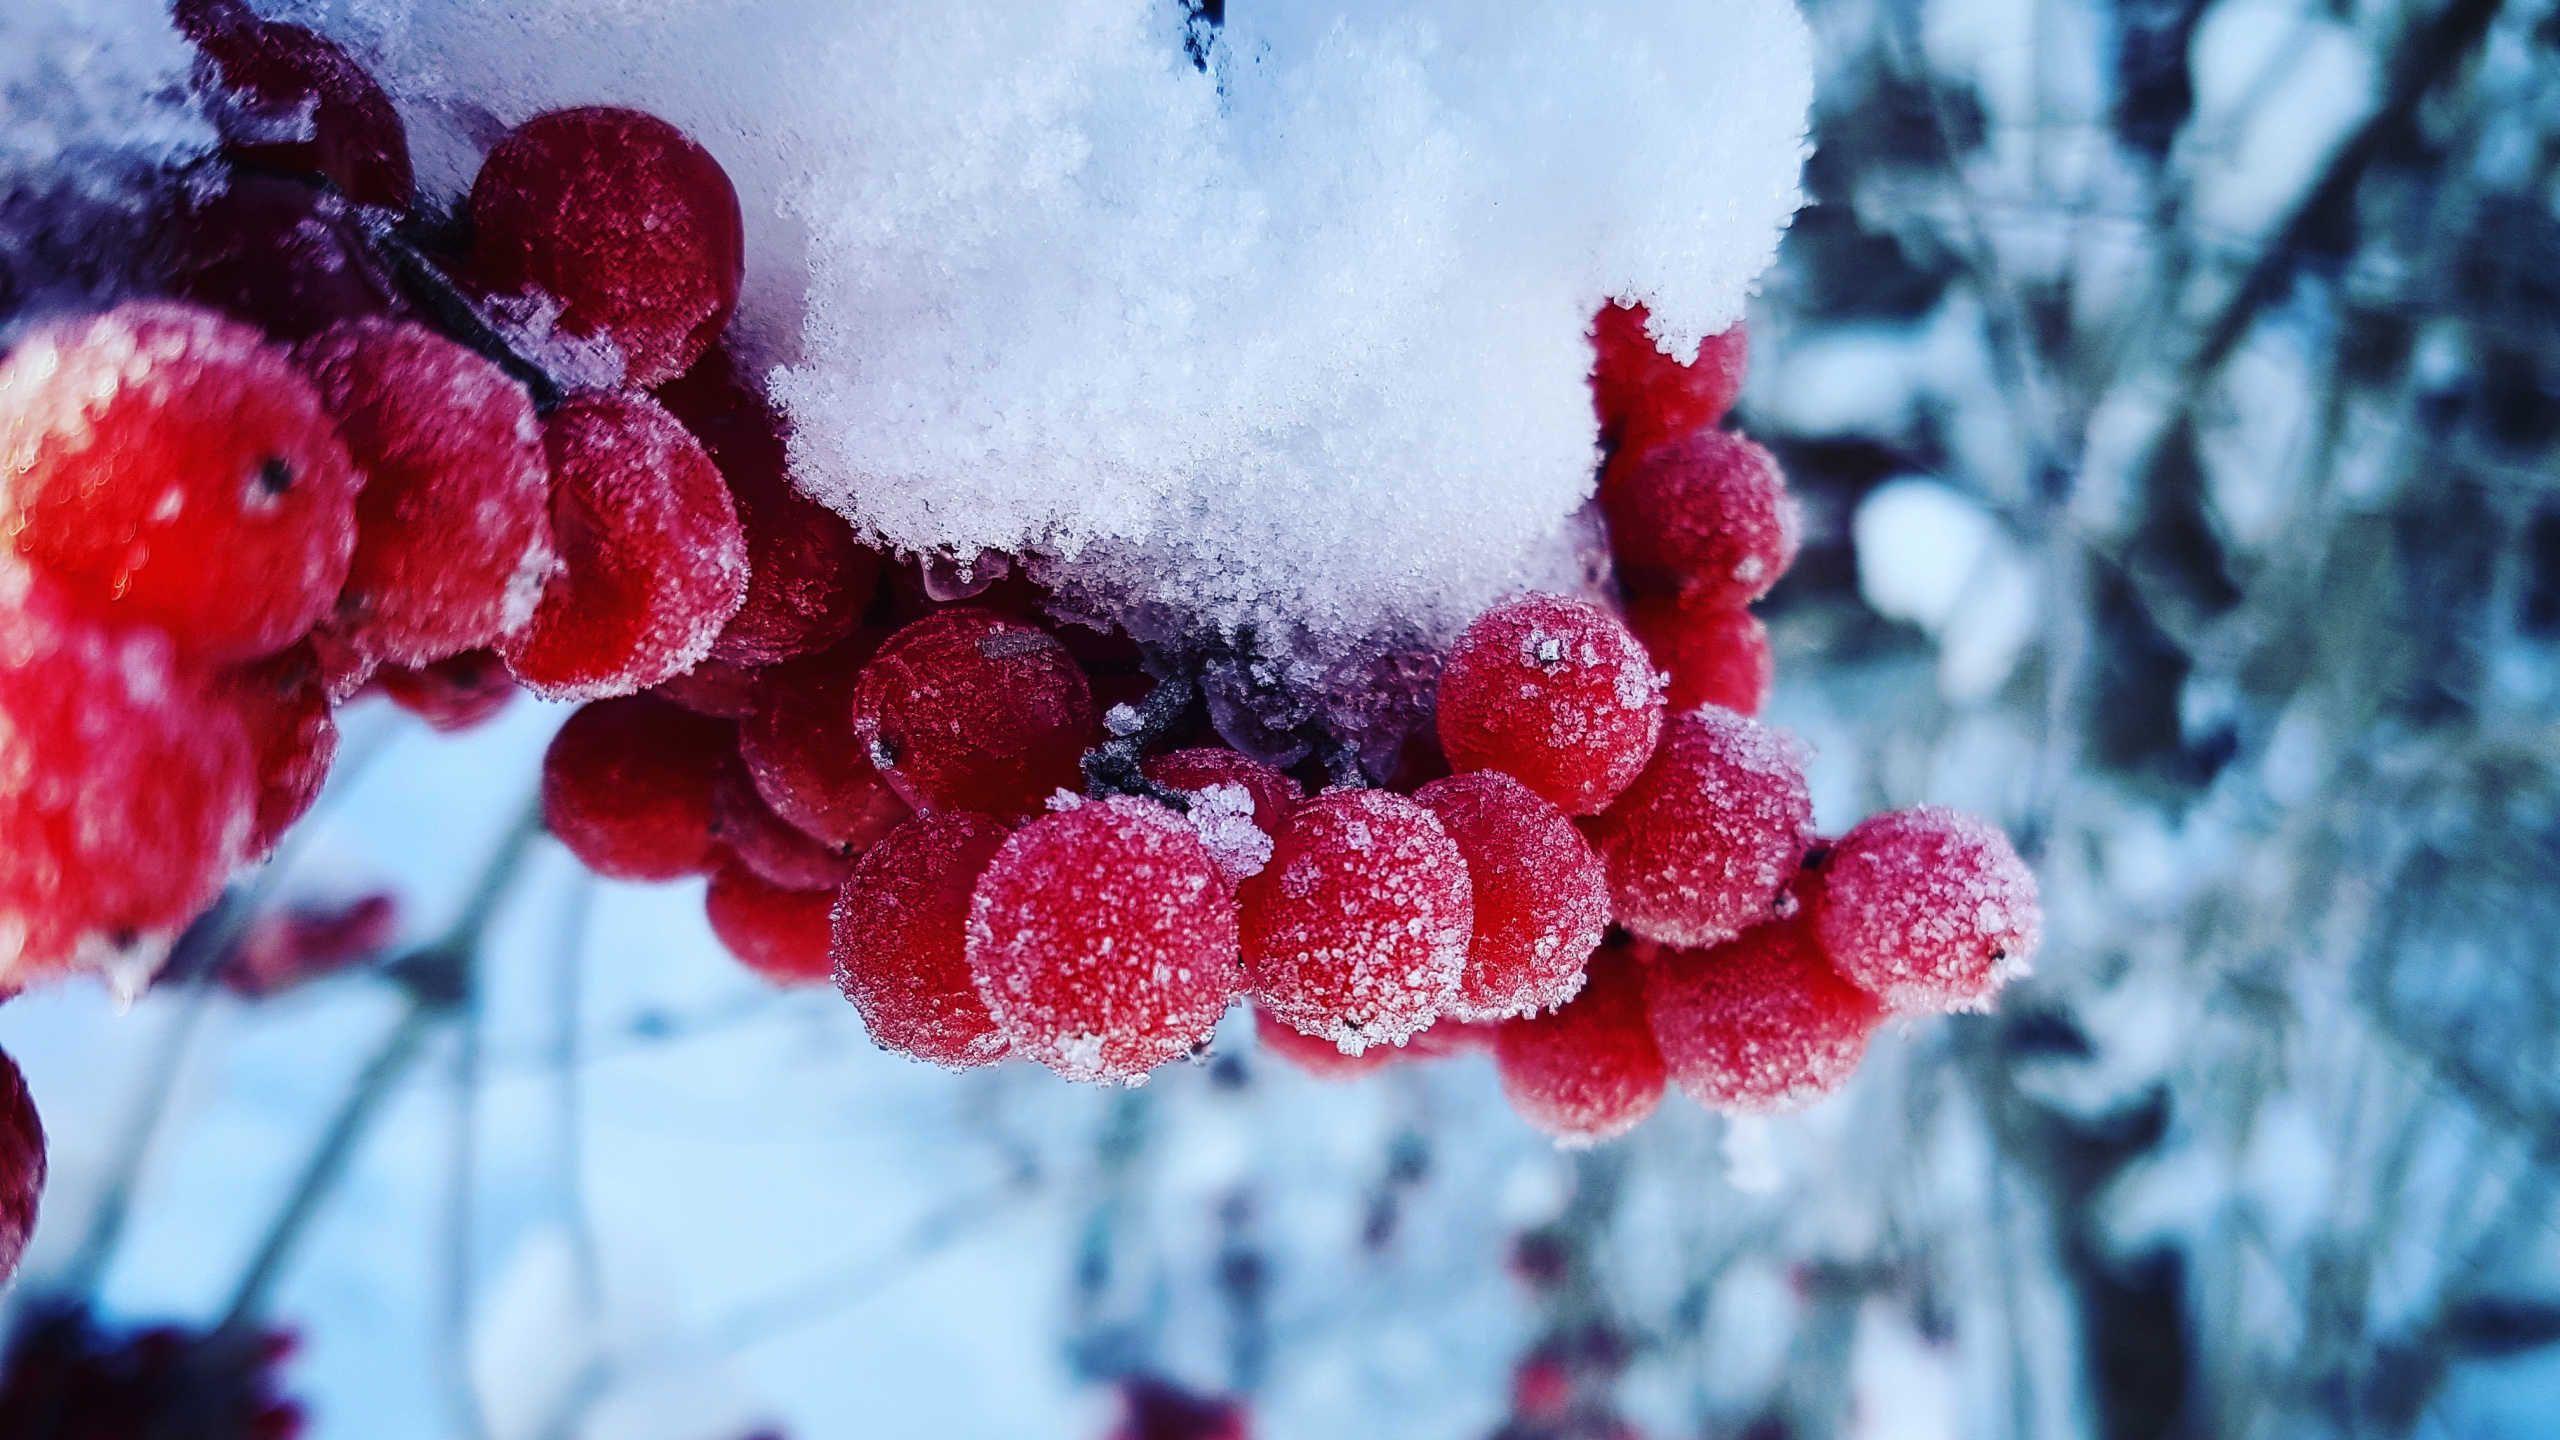 Red Round Fruits Covered With Snow. Wallpaper in 2560x1440 Resolution